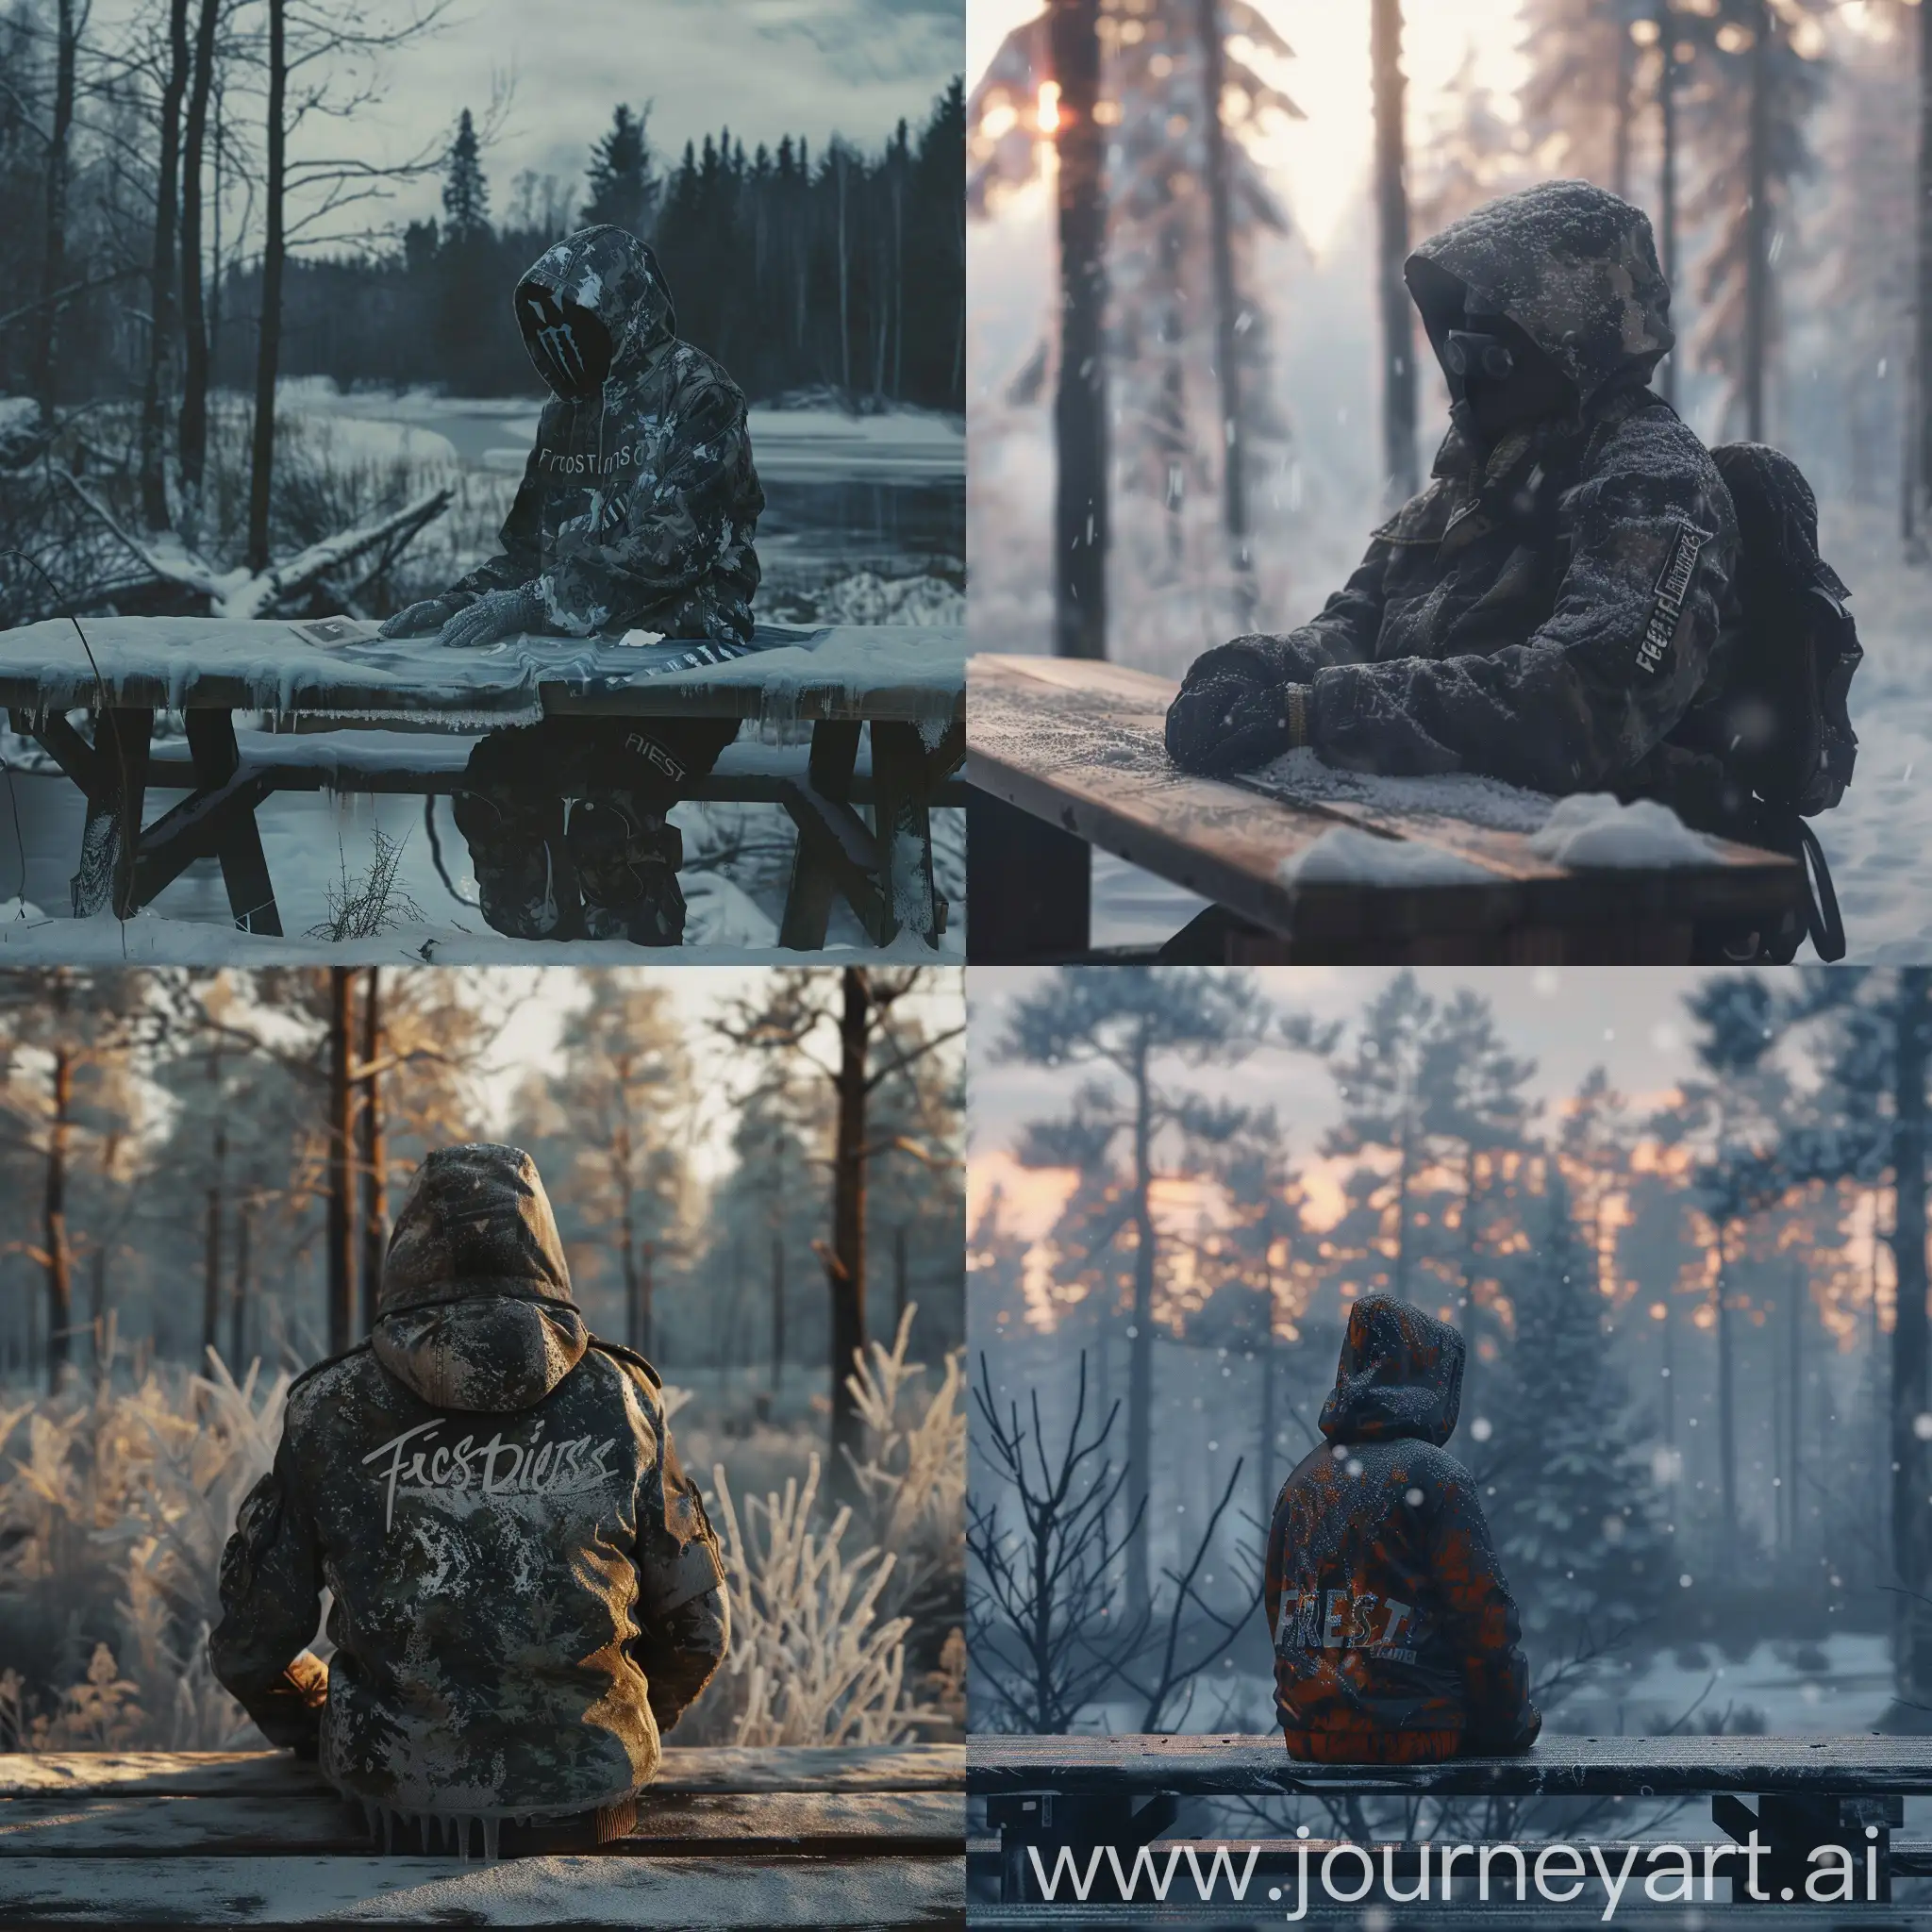 Cat-in-FrostEdits-Jacket-with-Morning-Winter-Forest-Background